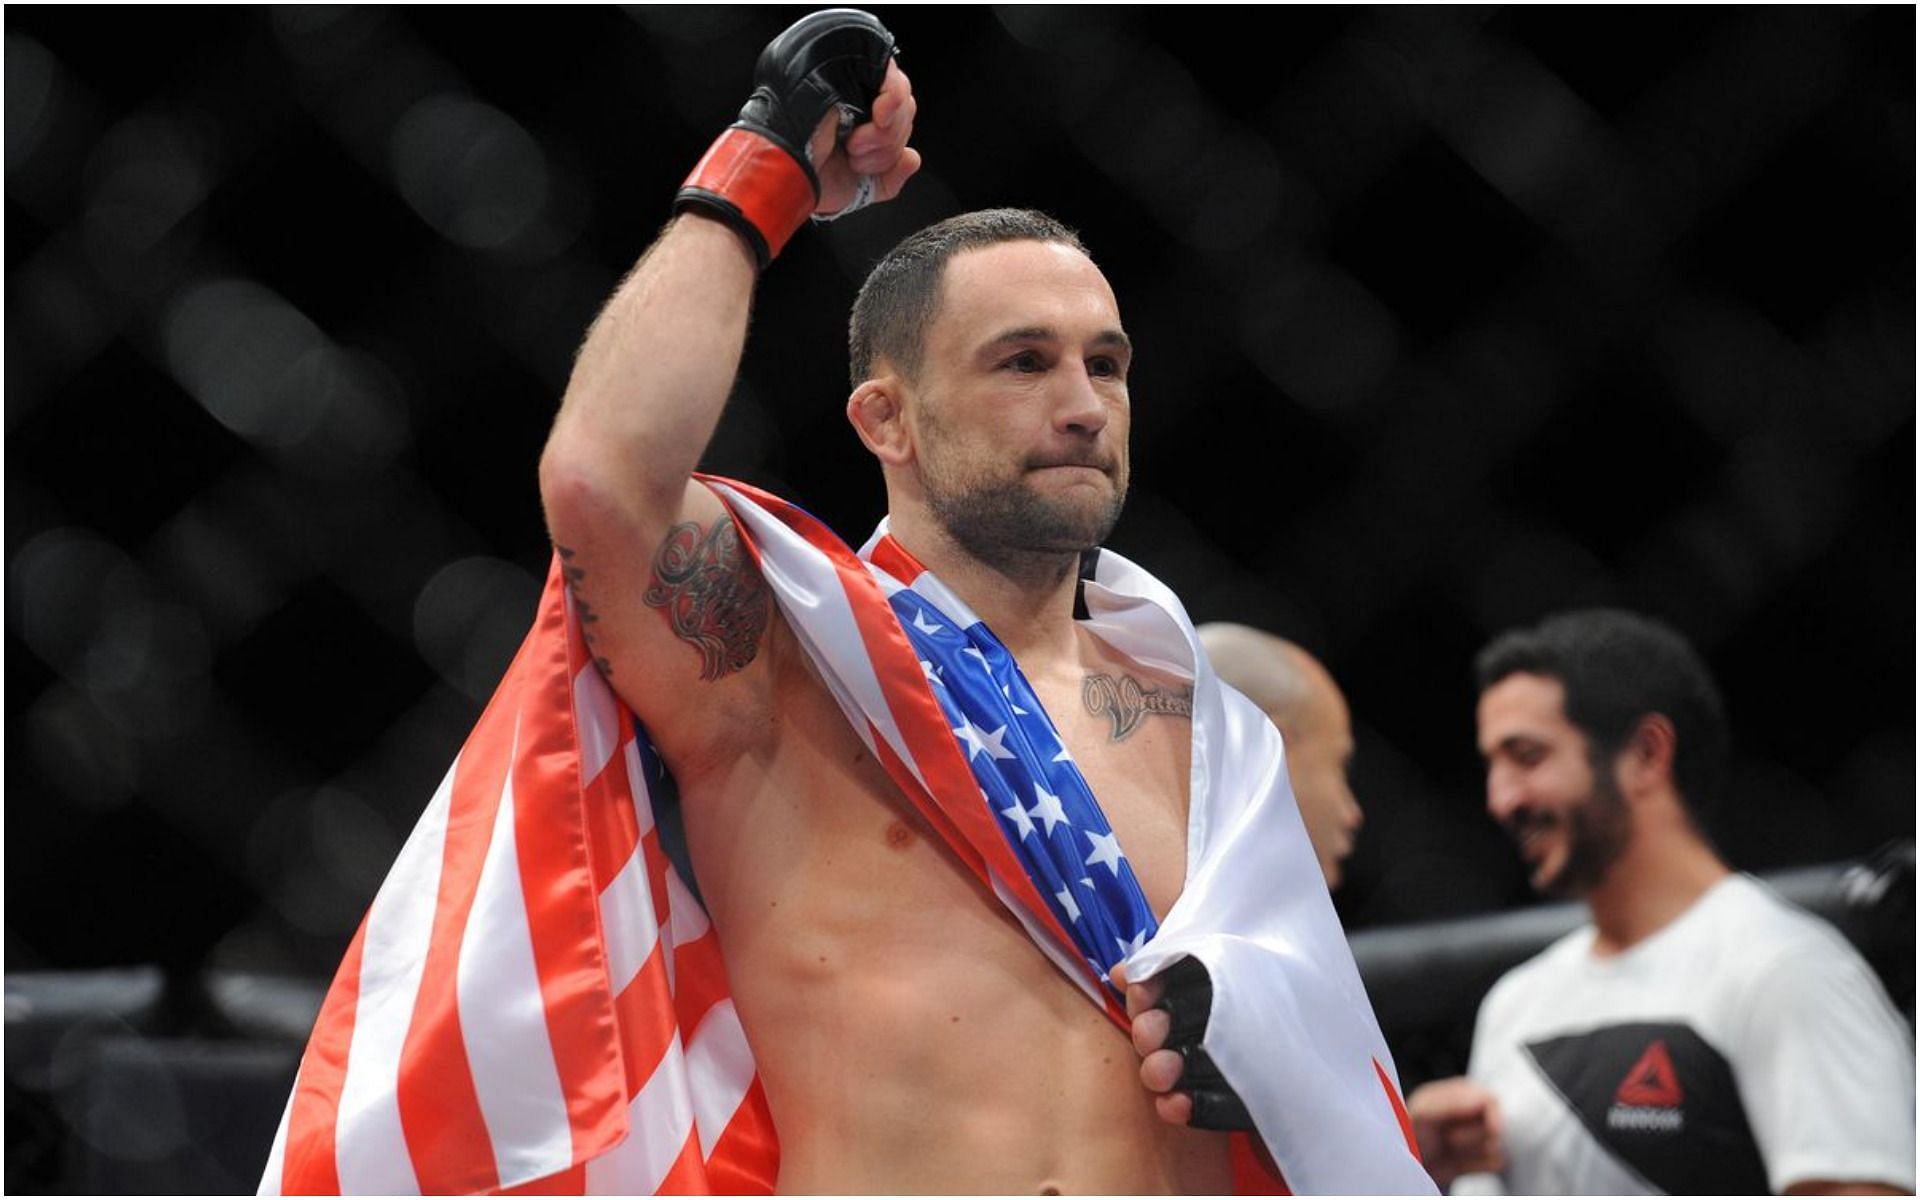 Frankie Edgar before considering a drop to bantamweight